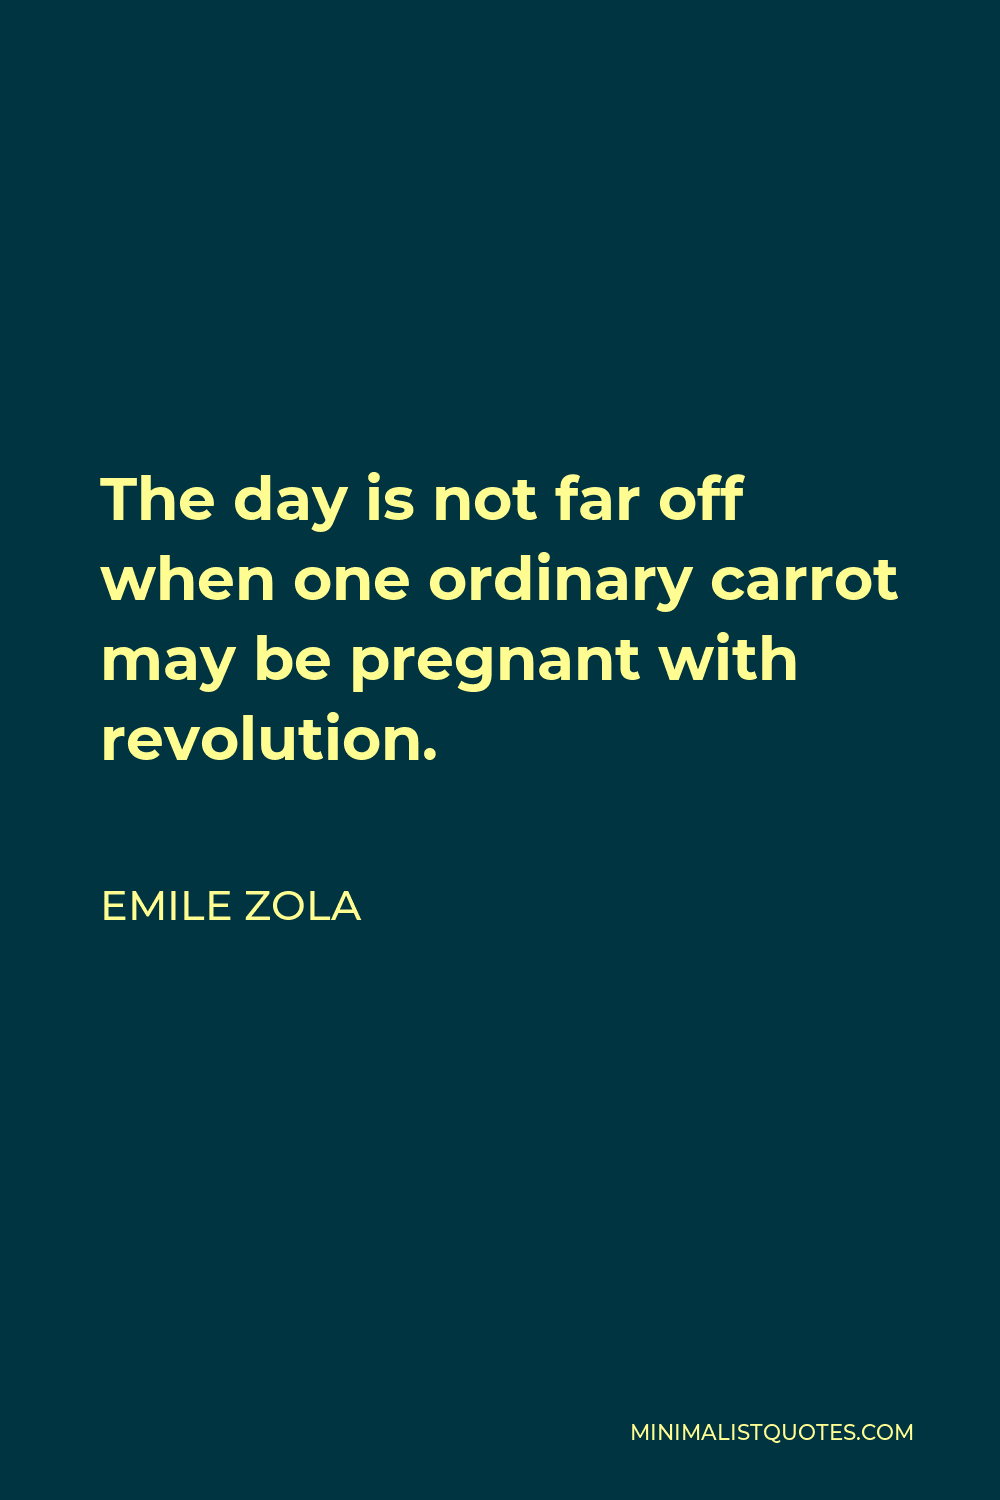 Emile Zola Quote - The day is not far off when one ordinary carrot may be pregnant with revolution.